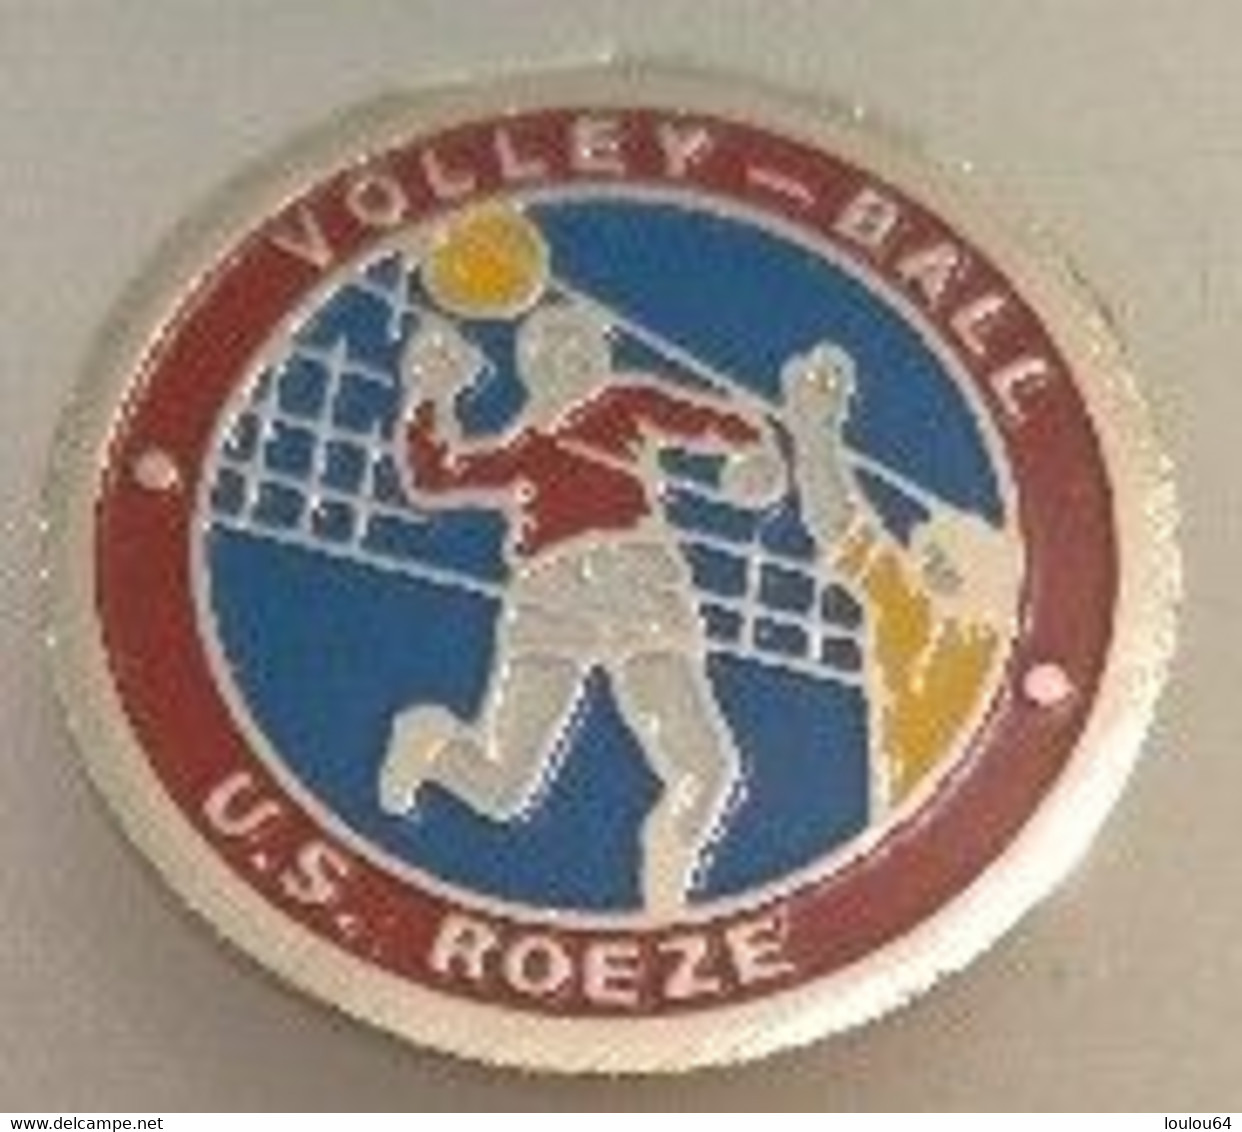 Pin's - Sports - Volleyball - U.S. ROEZE - VOLLEY-BALL - - Pallavolo